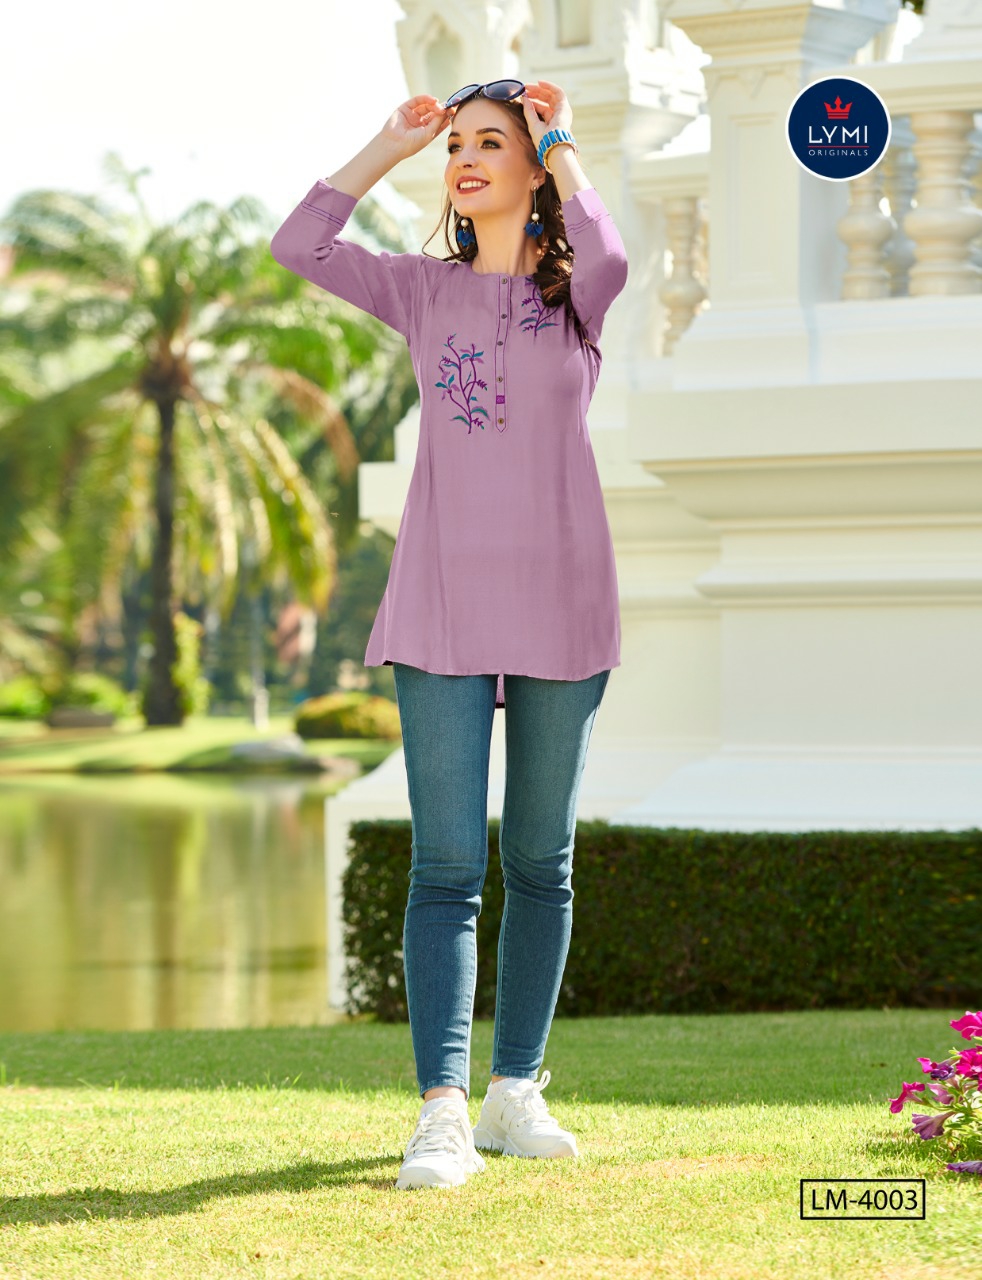 Lymi Presents Canon Viscose With Embroidery Work Short Tops Kurtis Collection